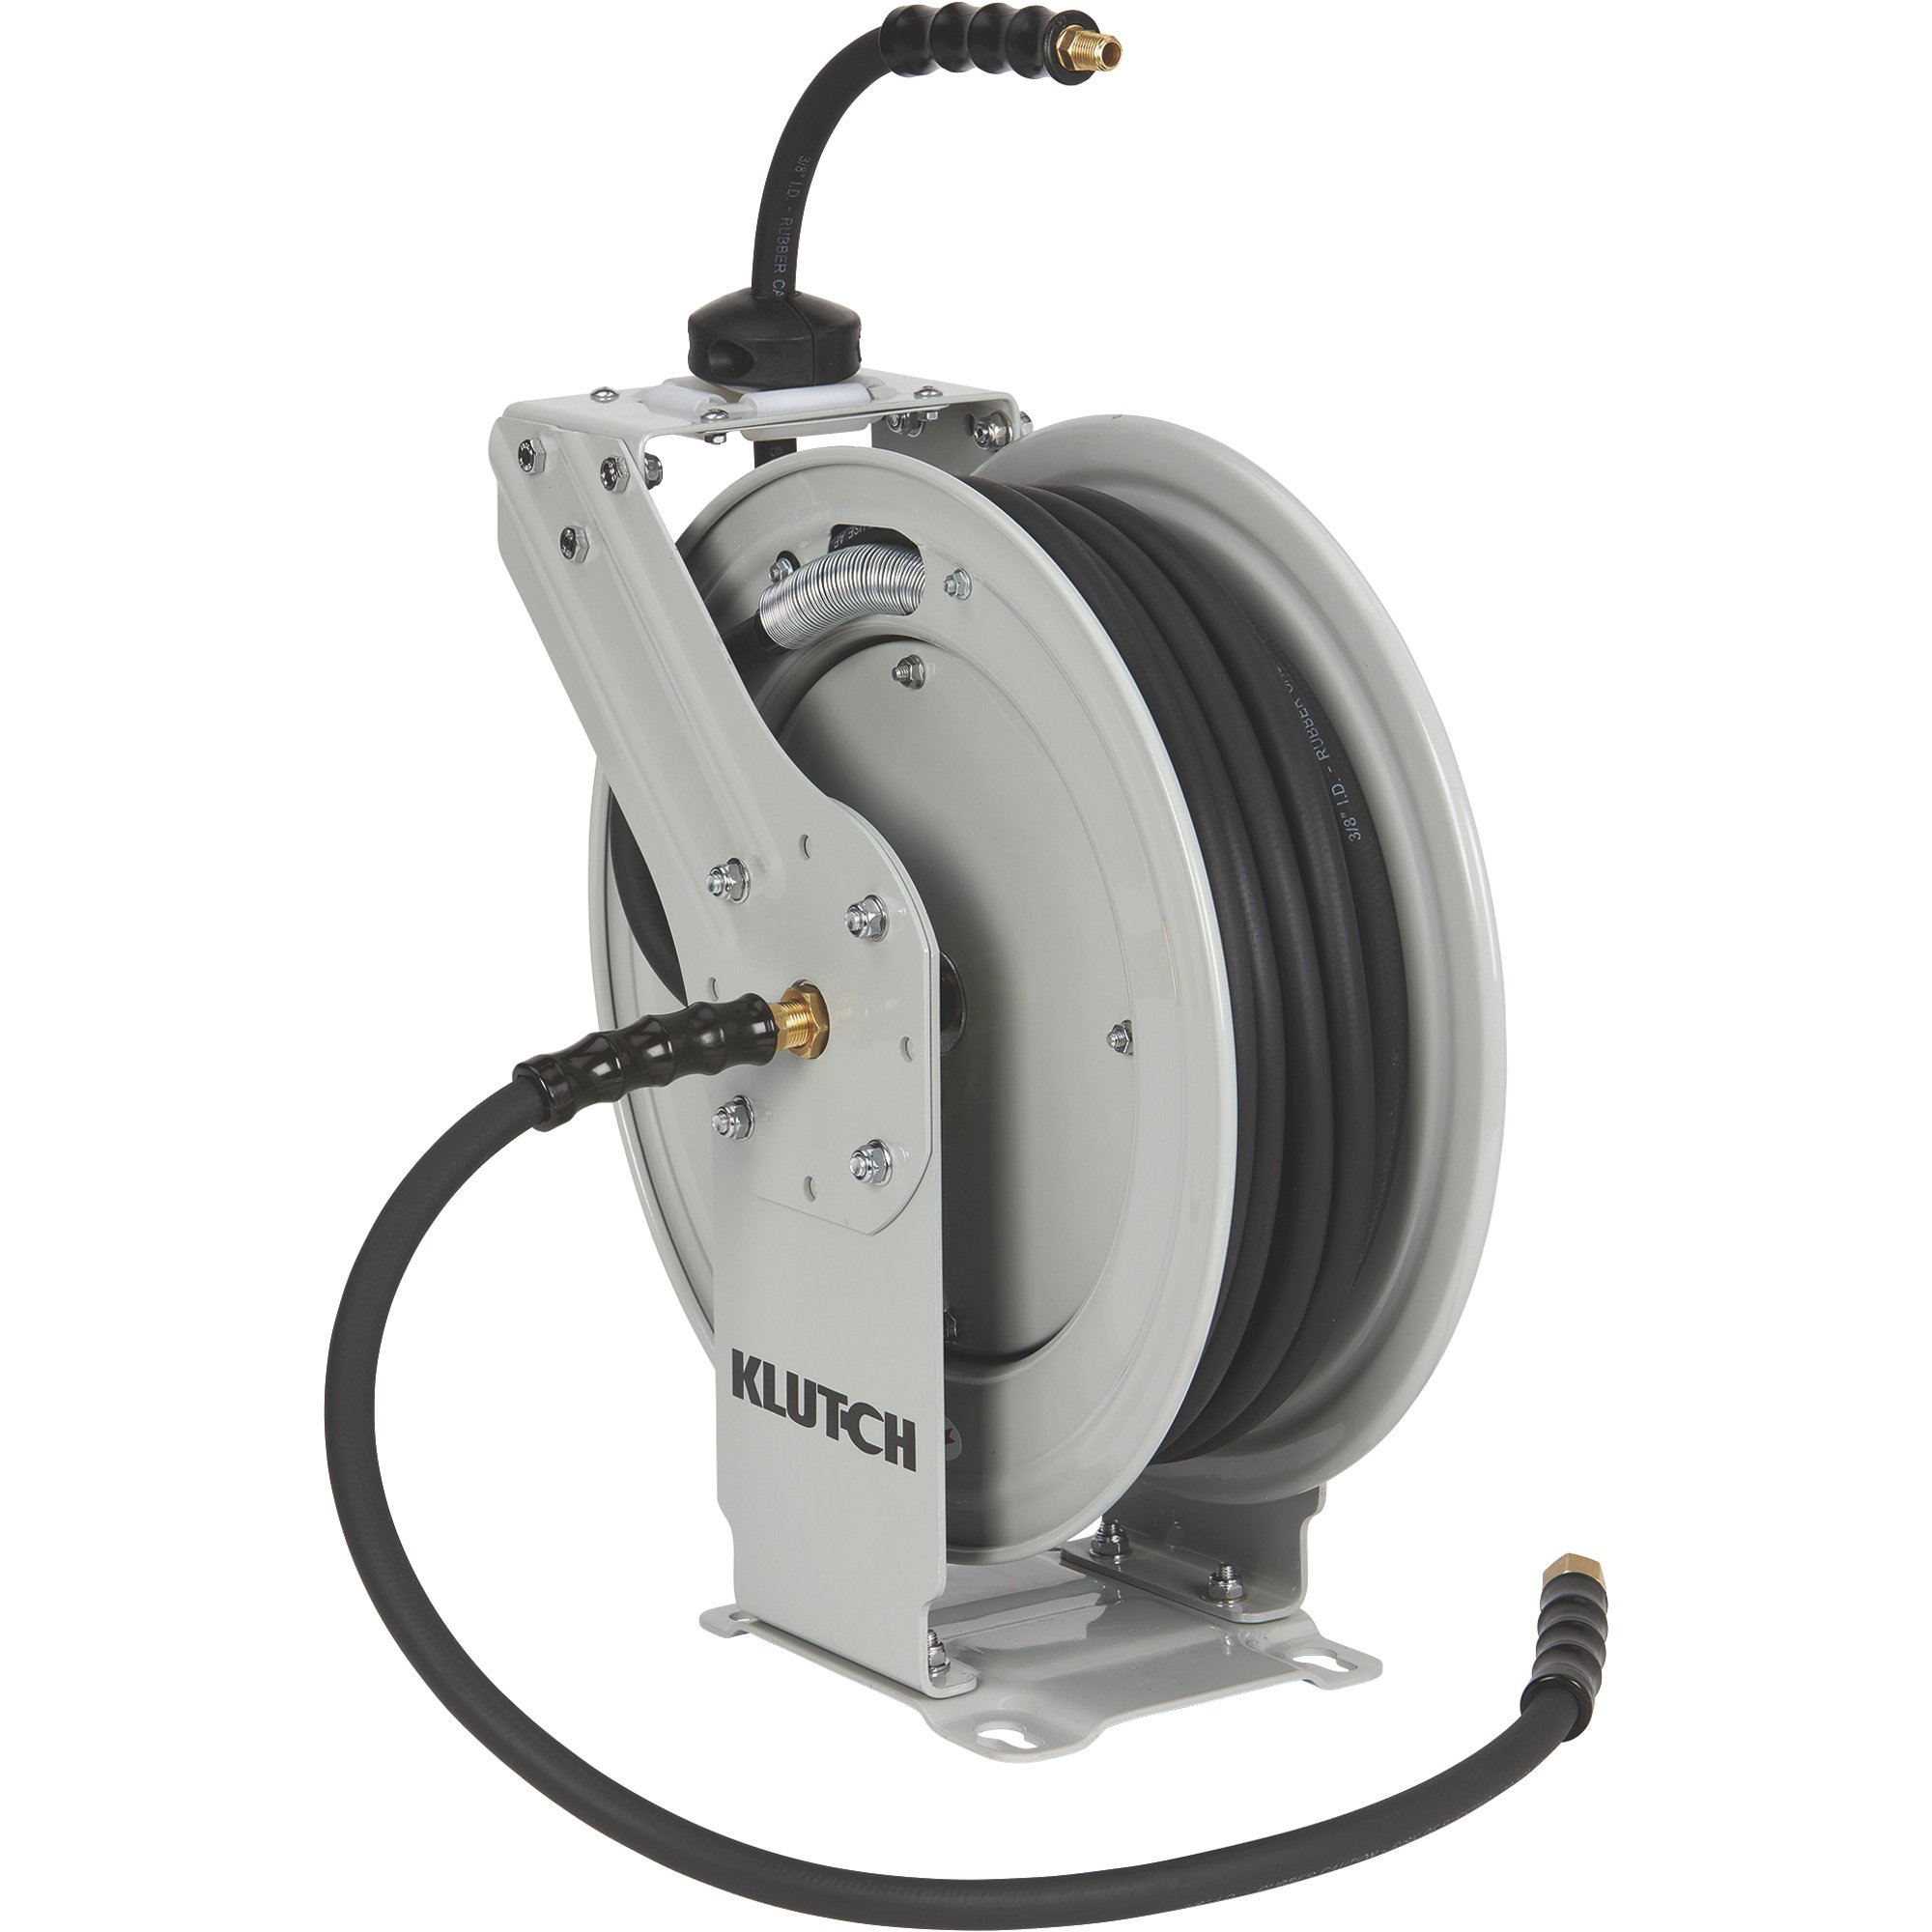 Klutch Auto-Rewind Air Hose Reel — With 3/8in. x 50ft. NBR Rubber Hose,  Dual Arm, 300 Max. PSI